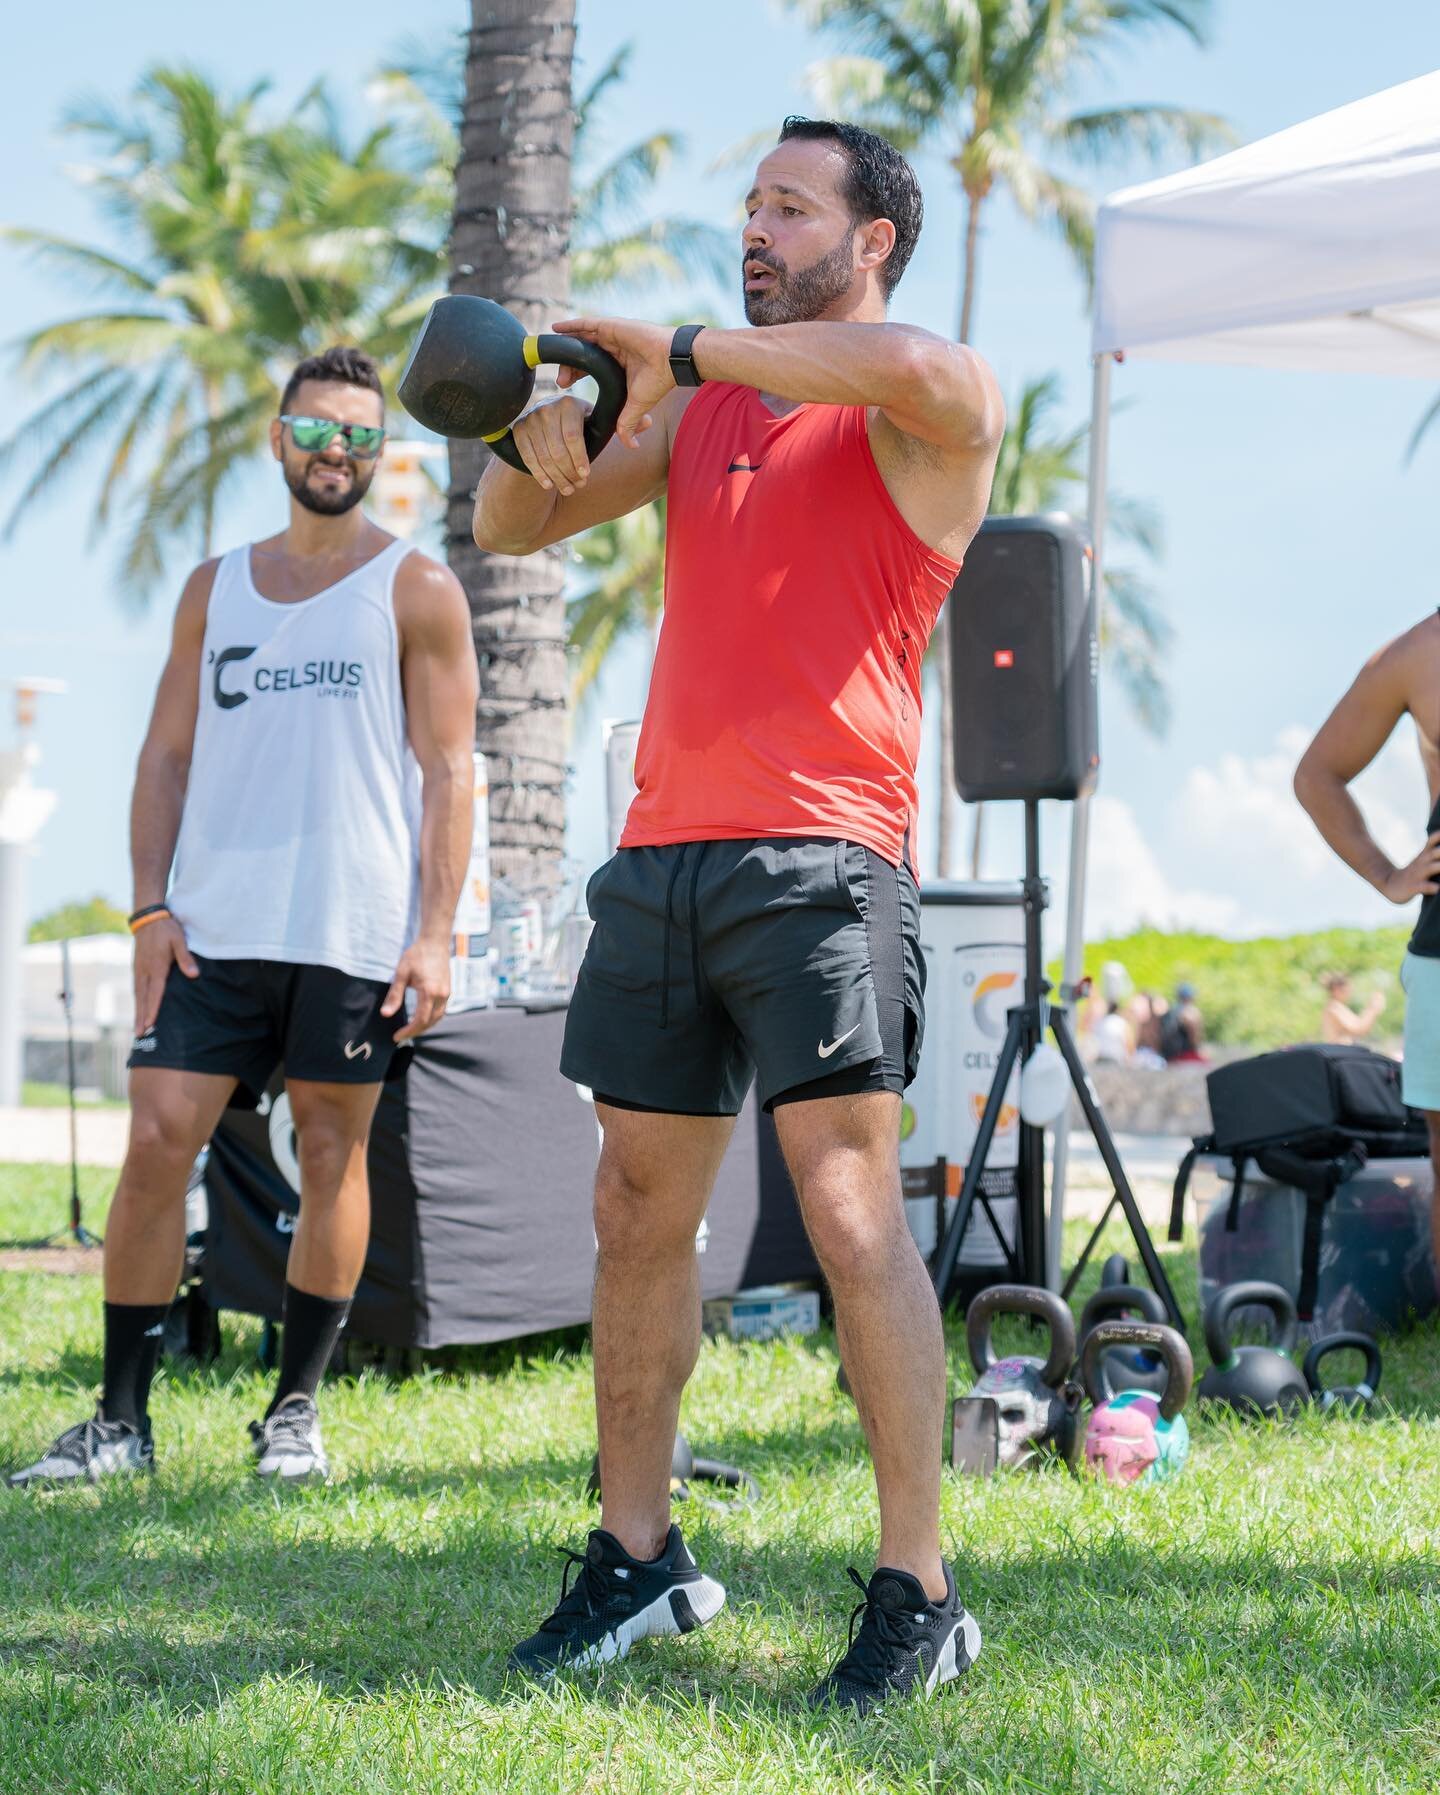 In my element.. teaching what I love to teach.. to a group of individuals hungry to learn and move.. on a beautiful Sunday in Miami. Does it get better than this? 

I&rsquo;m a little late with this one 😅 but a huge THANK YOU to @305kettlebellclub f